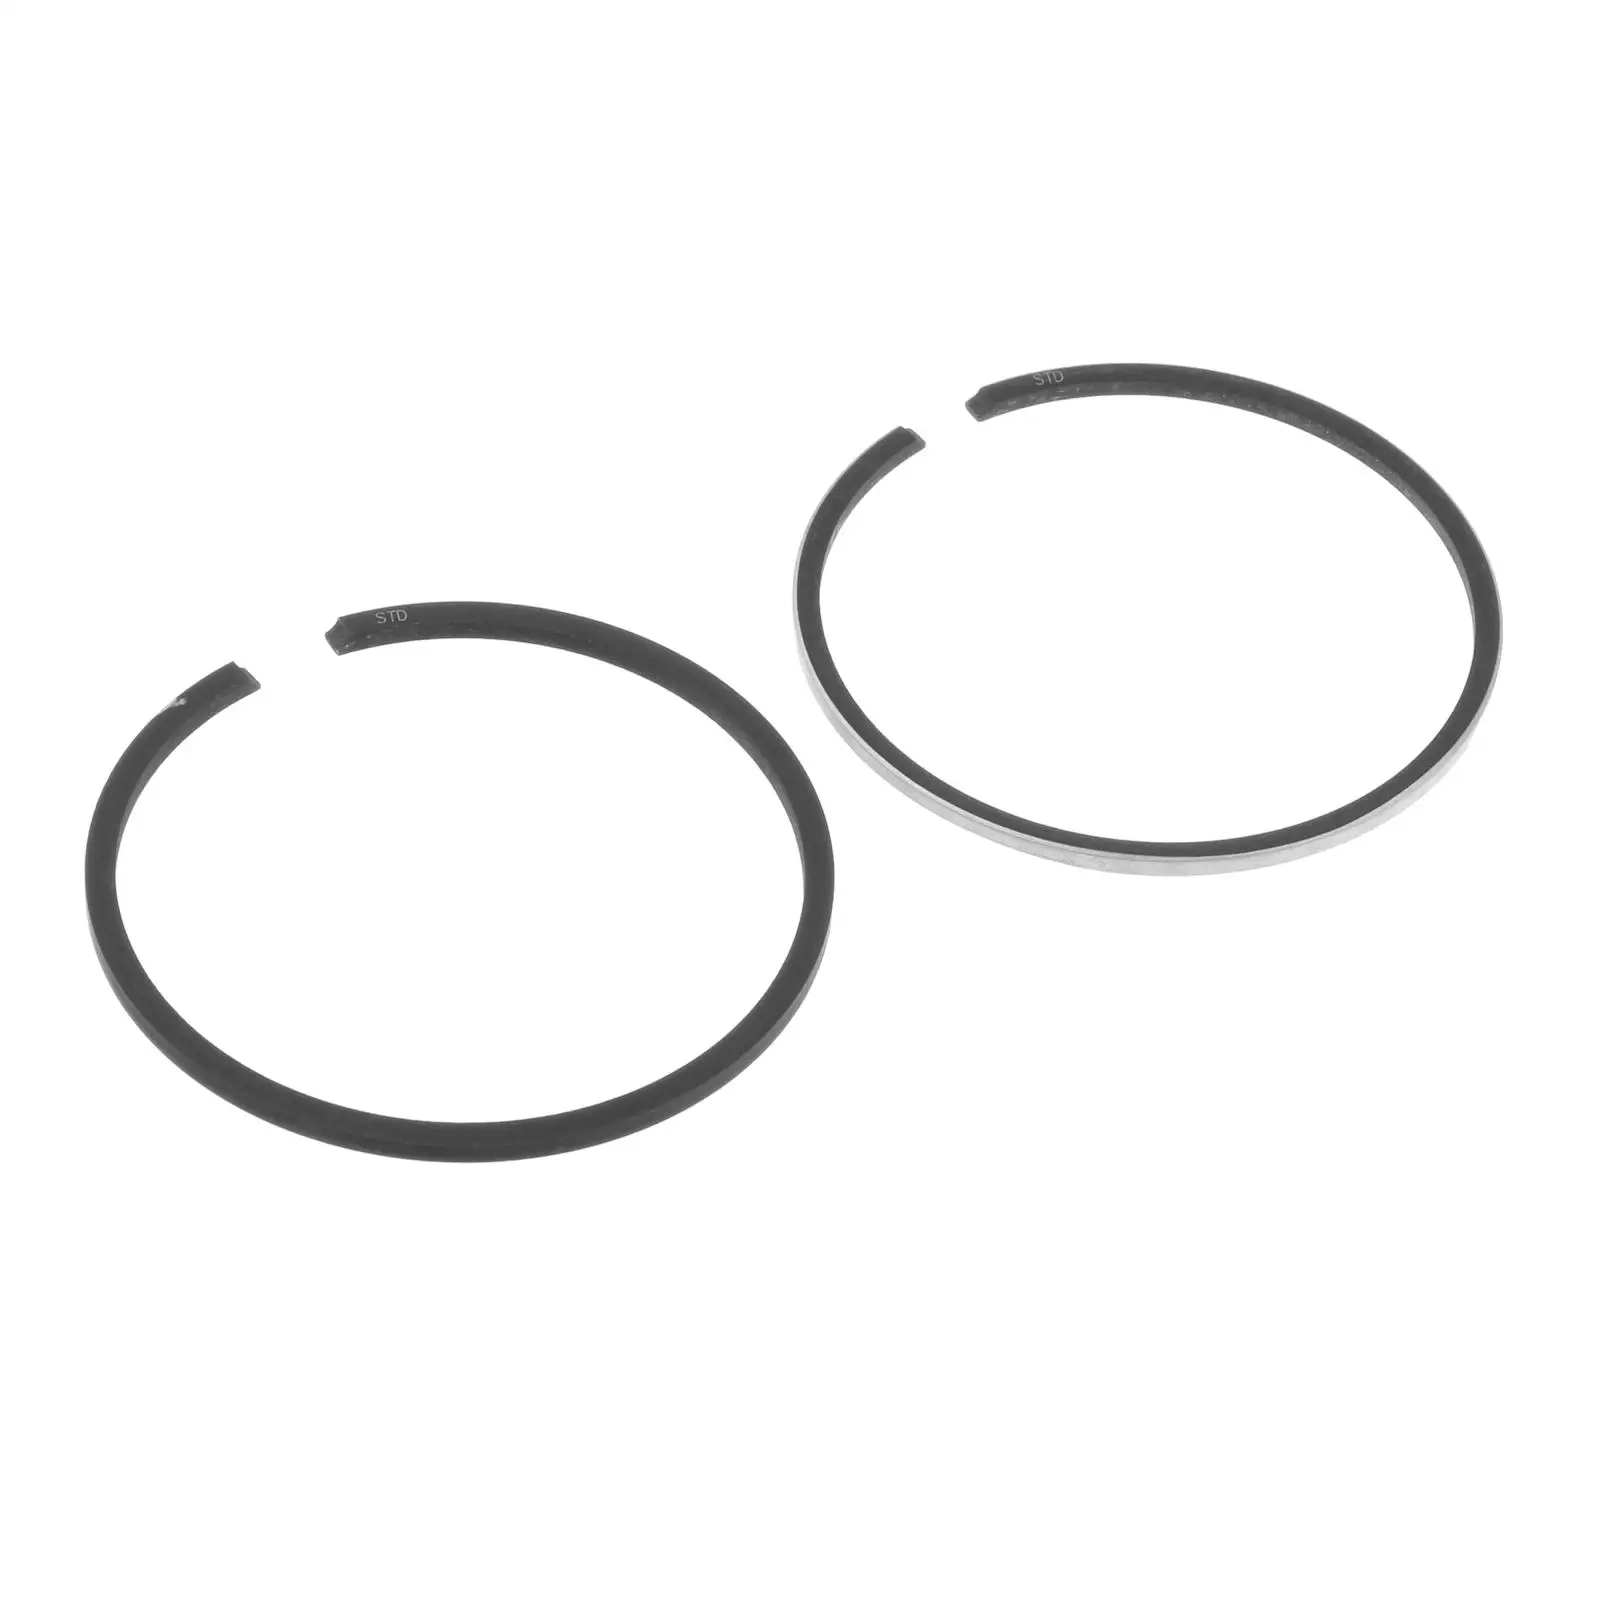 2 Pieces Engine Piston Rings No. 682-11610-01-00 for Parsun 9.9HP 15HP Marine Boat Outboards Engines